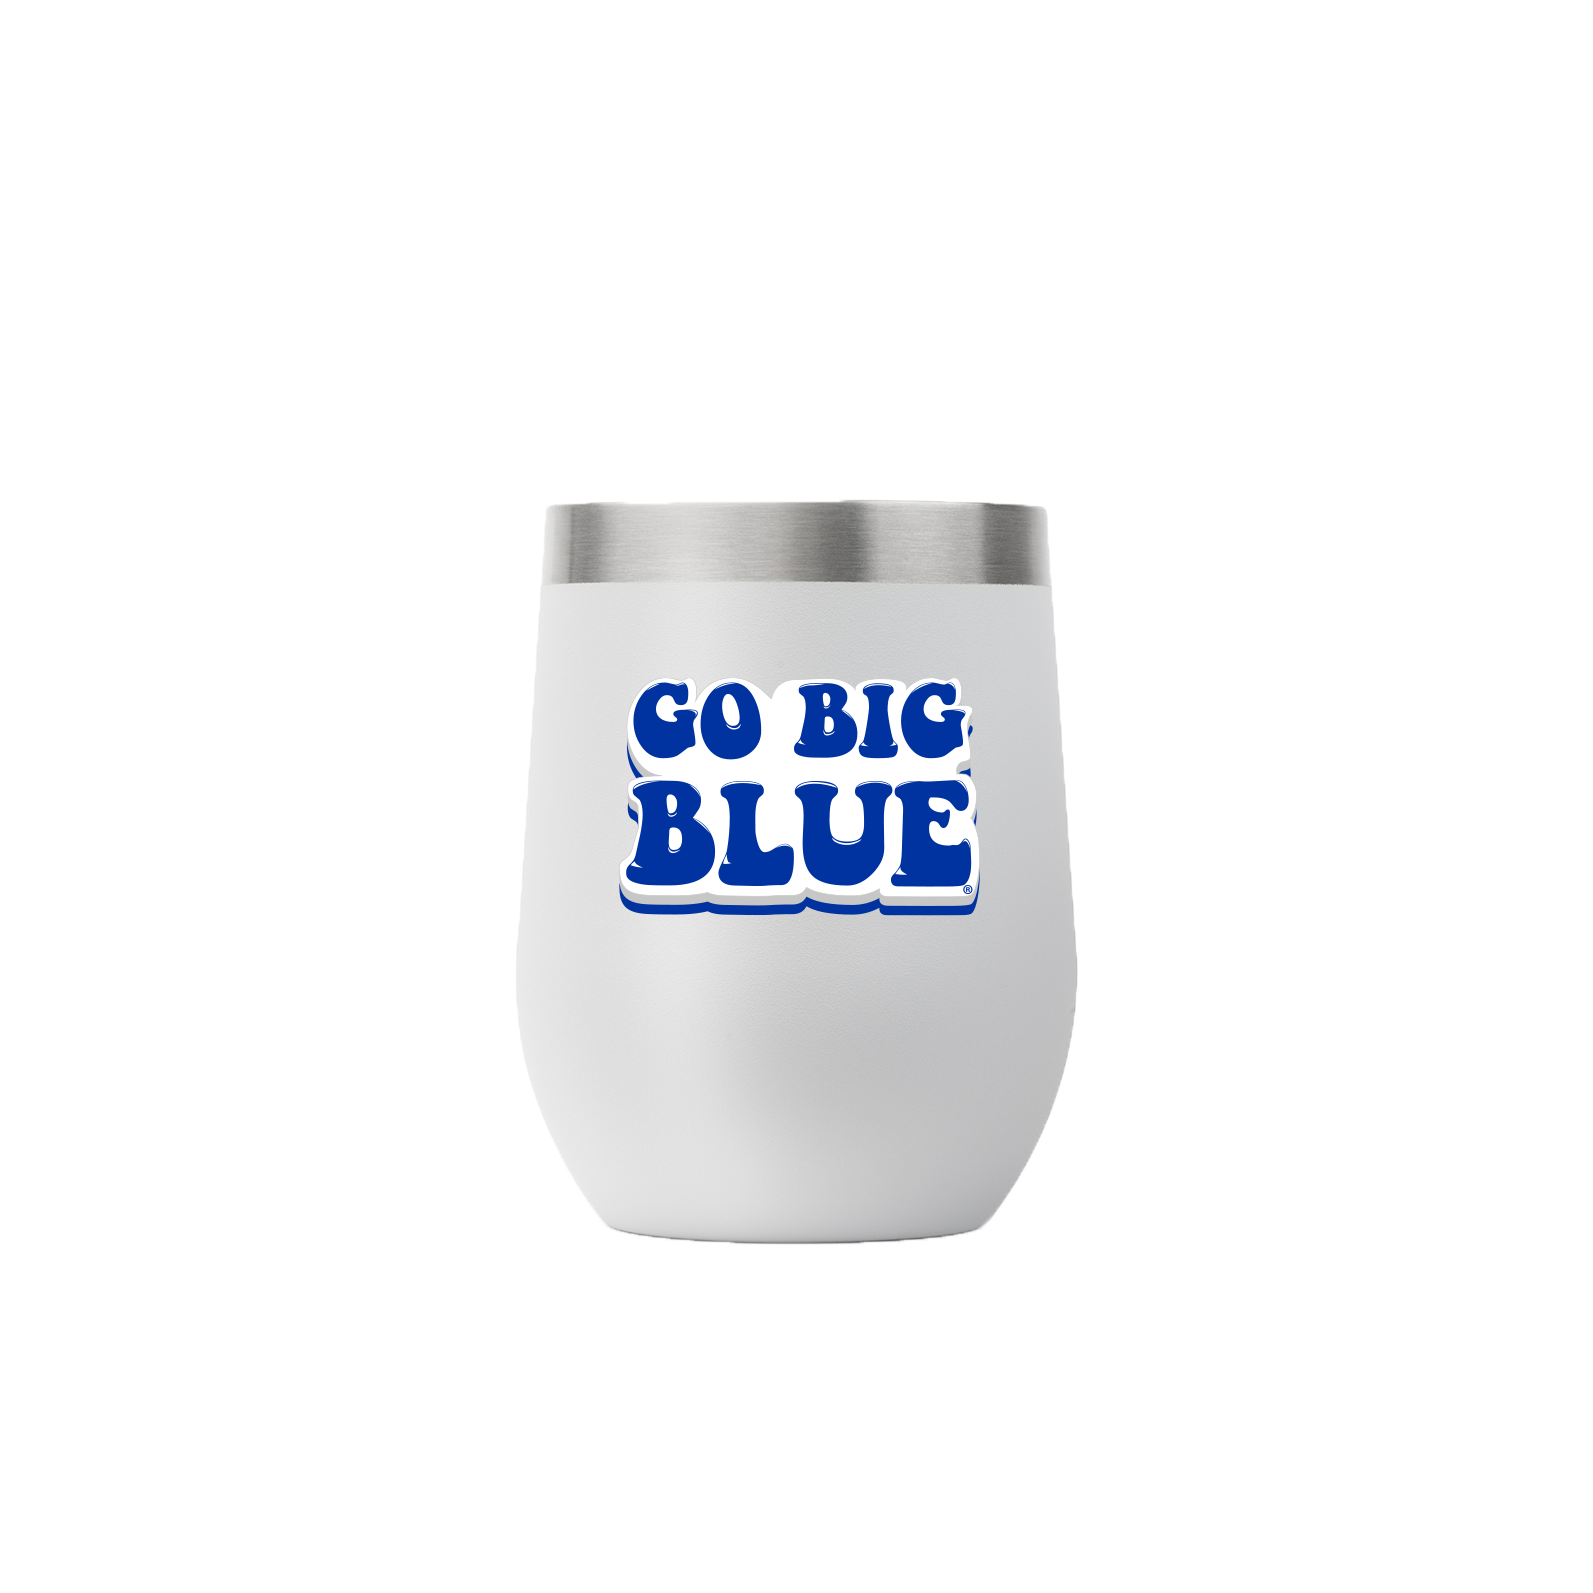 Kentucky Football 30 oz. RTIC Tumbler in Black by Deluge Concepts – Logan's  of Lexington